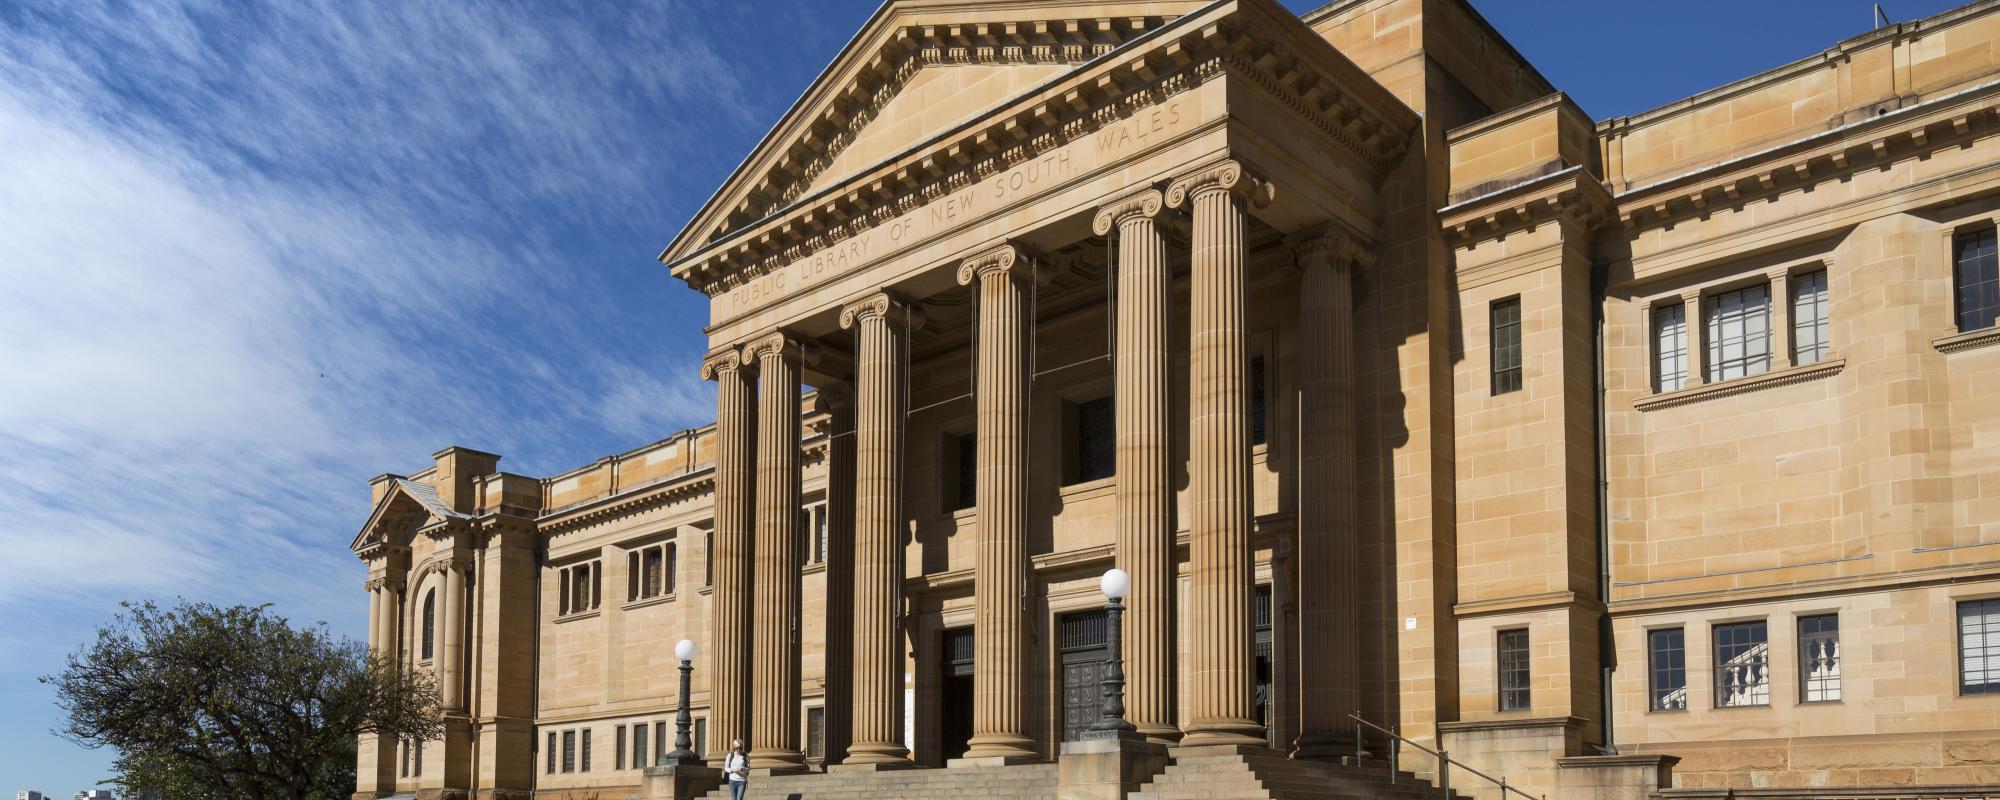 Mitchell Library exterior 